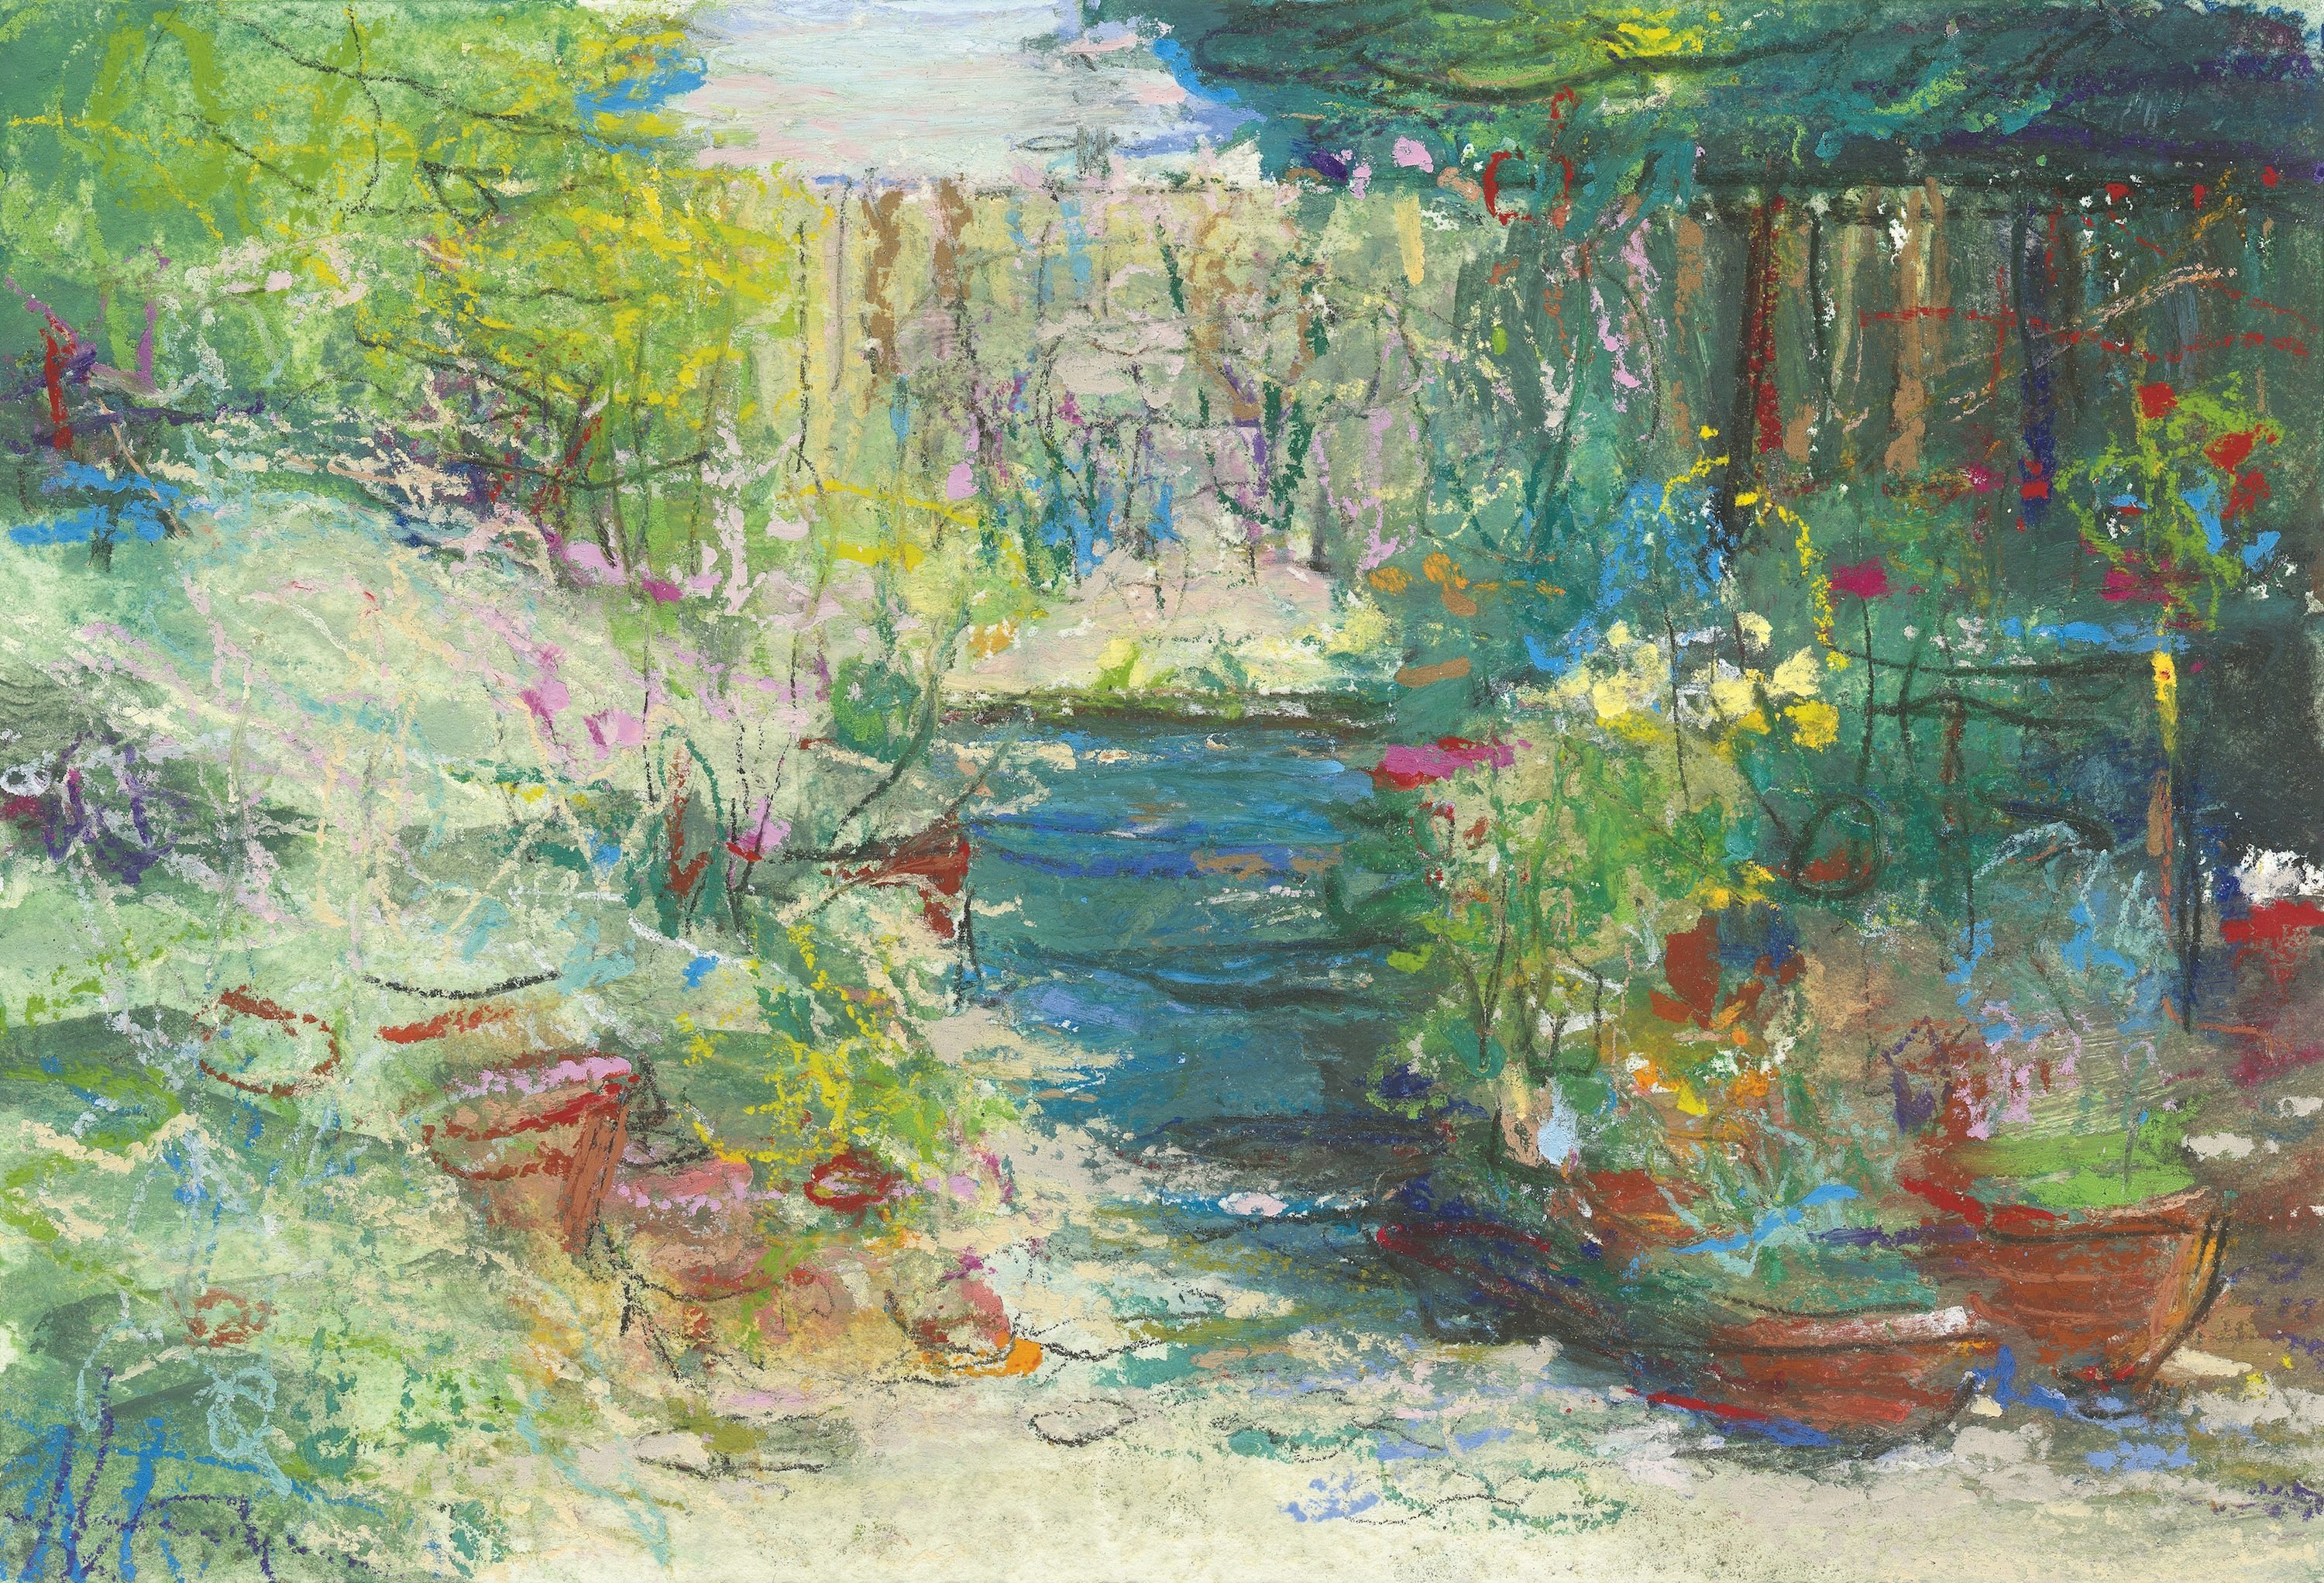 Steven Gordon; My Napa Garden, 2002, Original Printmaking Giclee, 21 x 14 inches. Artwork description: 241 Limited Edition Print from an original Pastel Painting: This view of my garden at our home in Napa Valley is done with a more impressionistic and relatively new technique combining oil and soft pastel which creates a spontaneous feel and allows for a more vibrant approach to ...